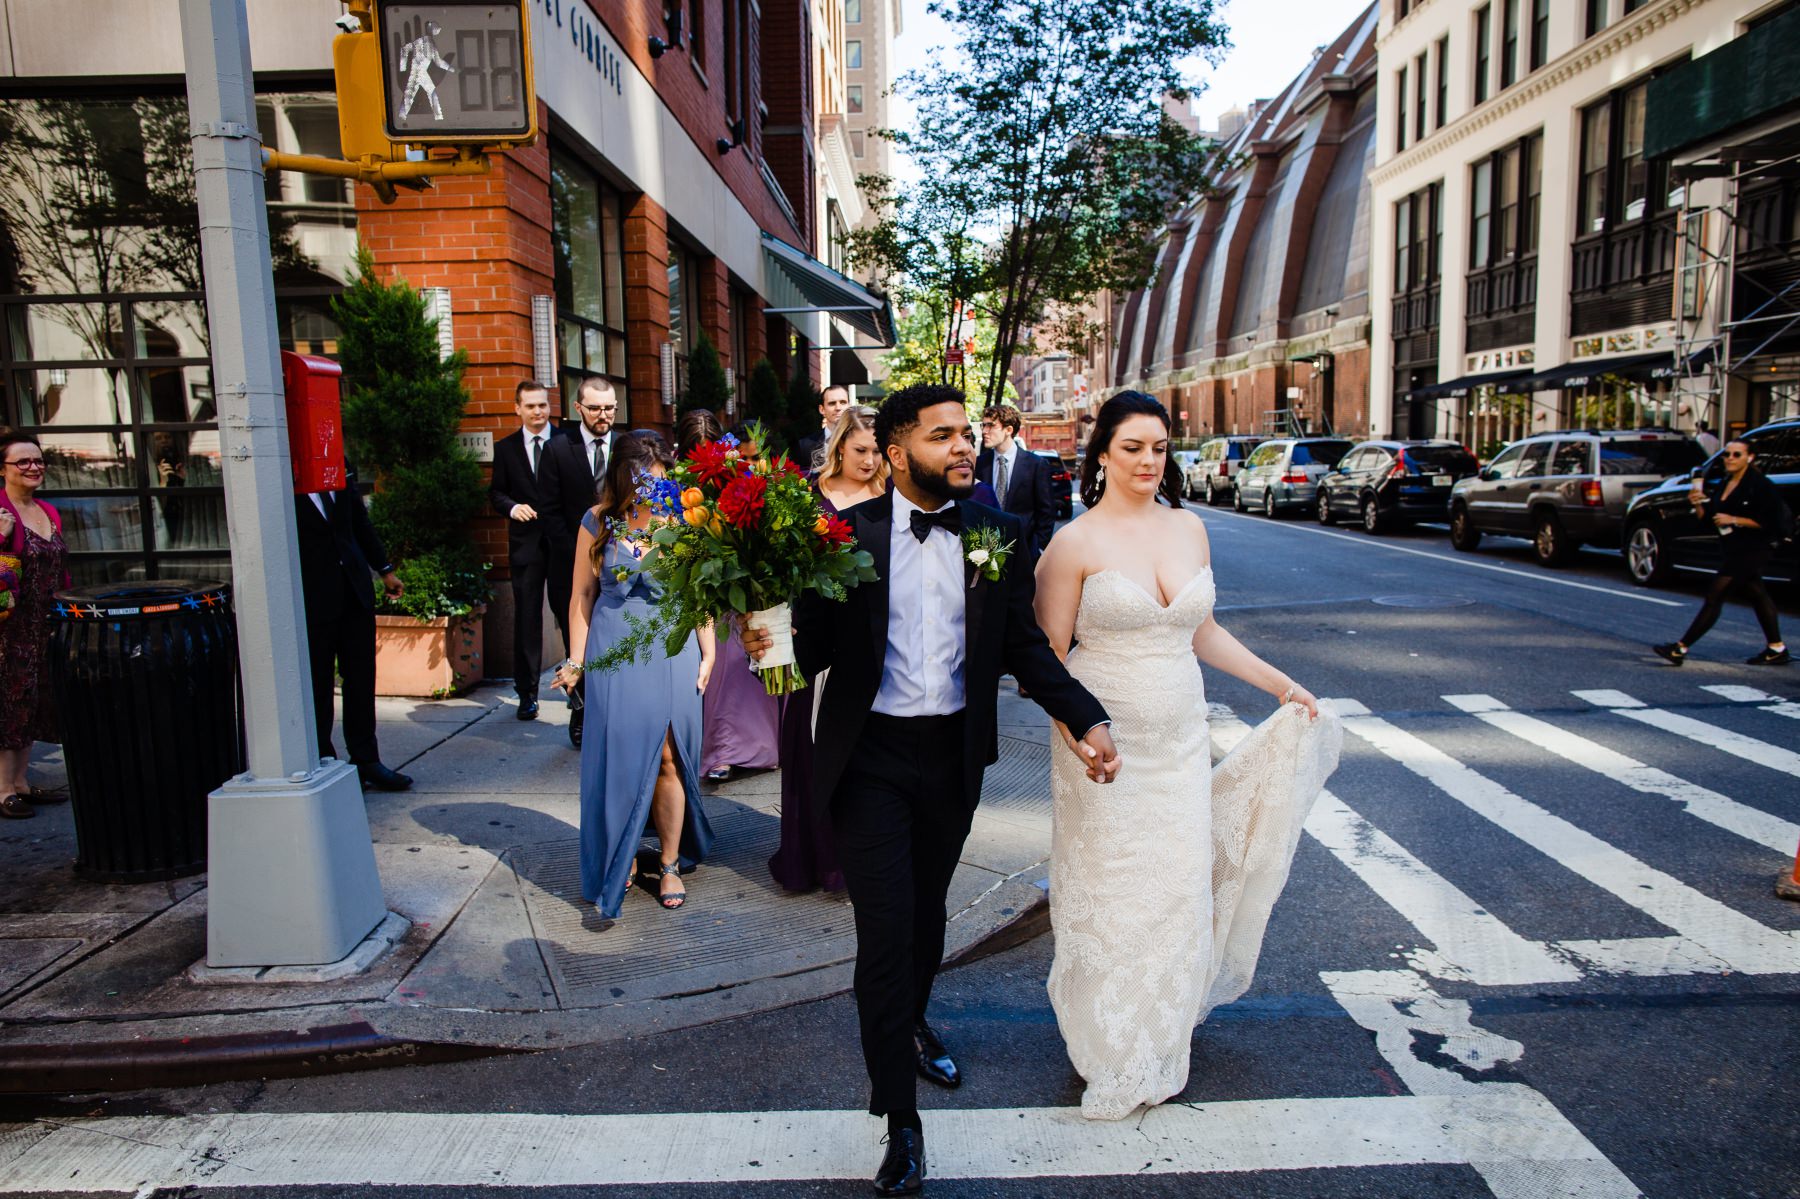  Caitlin and Bryon's wedding near Madison Square Park at the Giraffe Hotel in Midtown Manhattan. We approached this day as photjournalist wedding photographers first, aiming to create natural, authentic, but creative photos that tell an emotional and